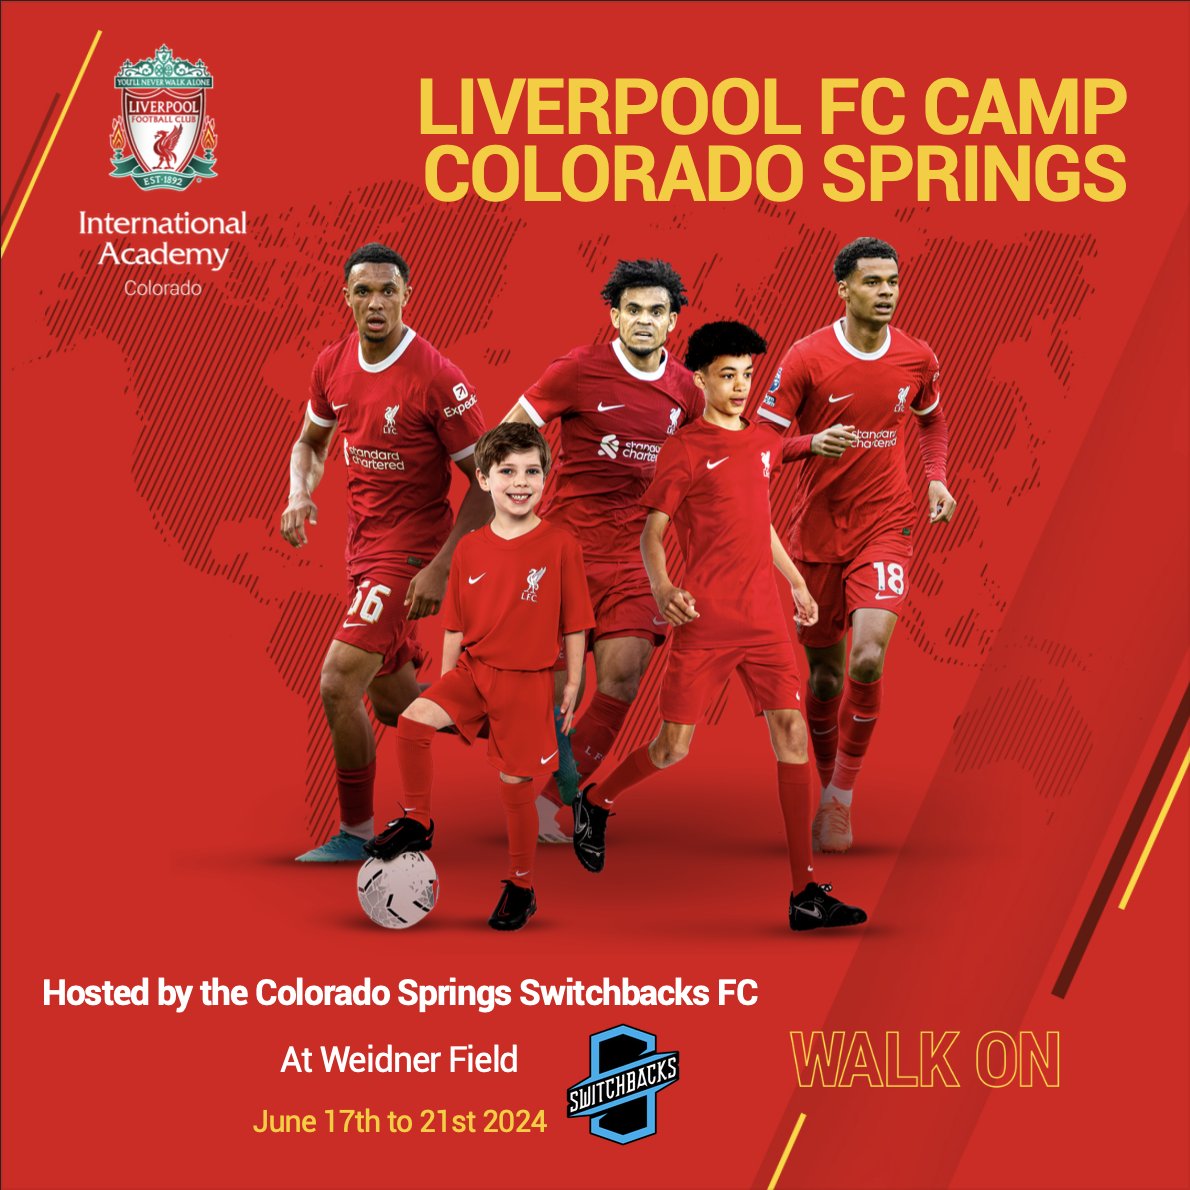 Liverpool FC Summer Camp is almost sold out! Make sure to secure your spot today with the link below: bit.ly/3SzYRiQ #forthesprings #switchbacksfc